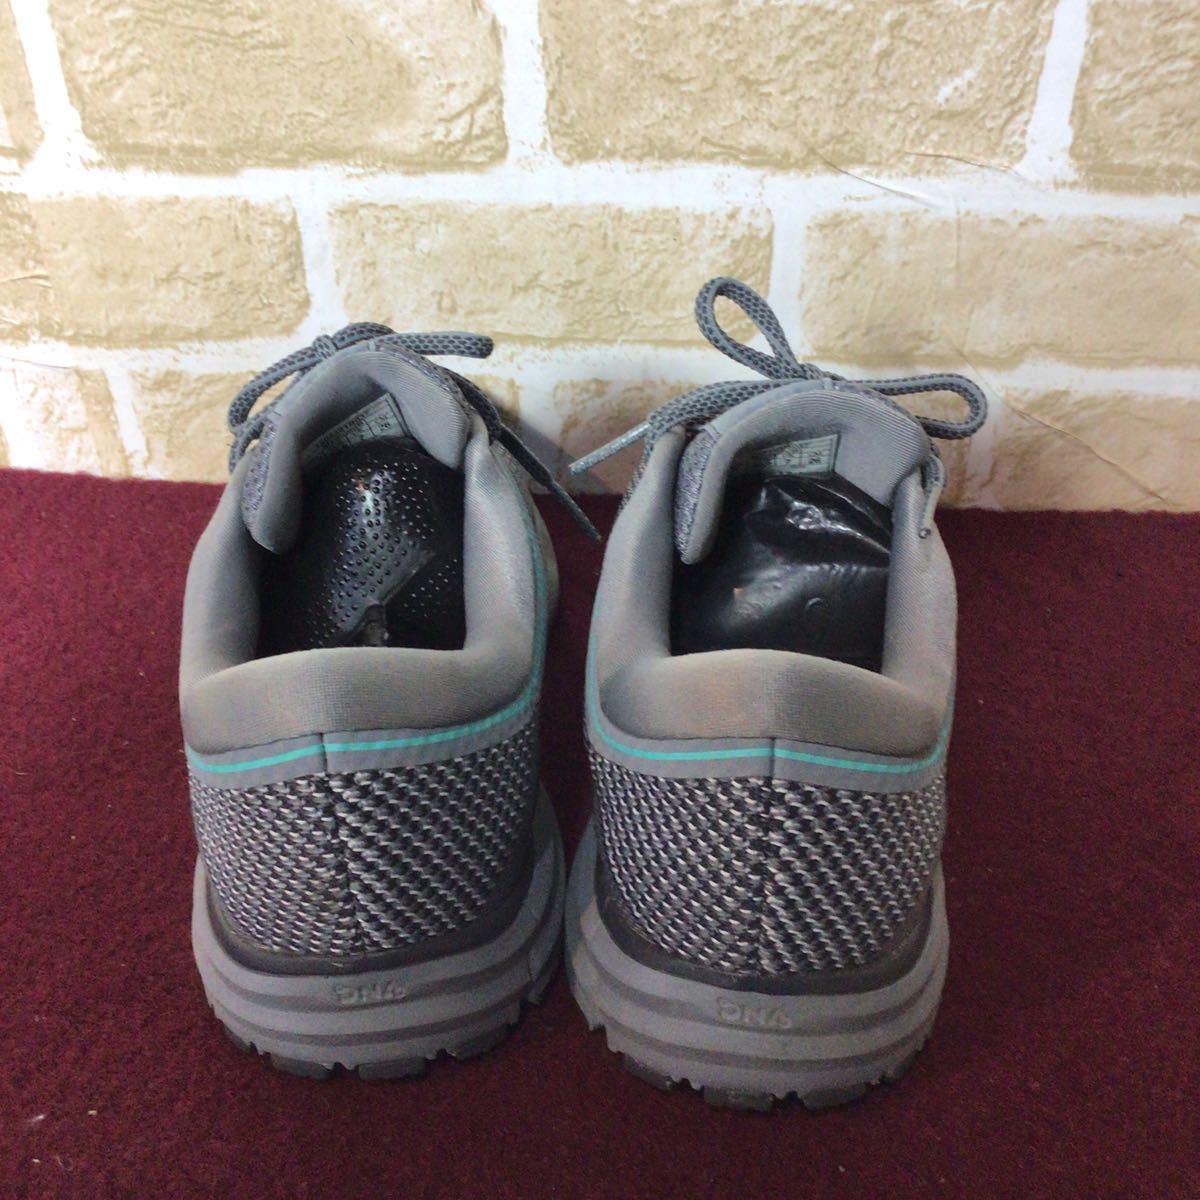 [ selling out! free shipping!]A-40 BROOKS! walking shoes!26! gray! light blue! commuting! running! training! sport shoes! used! beautiful goods!